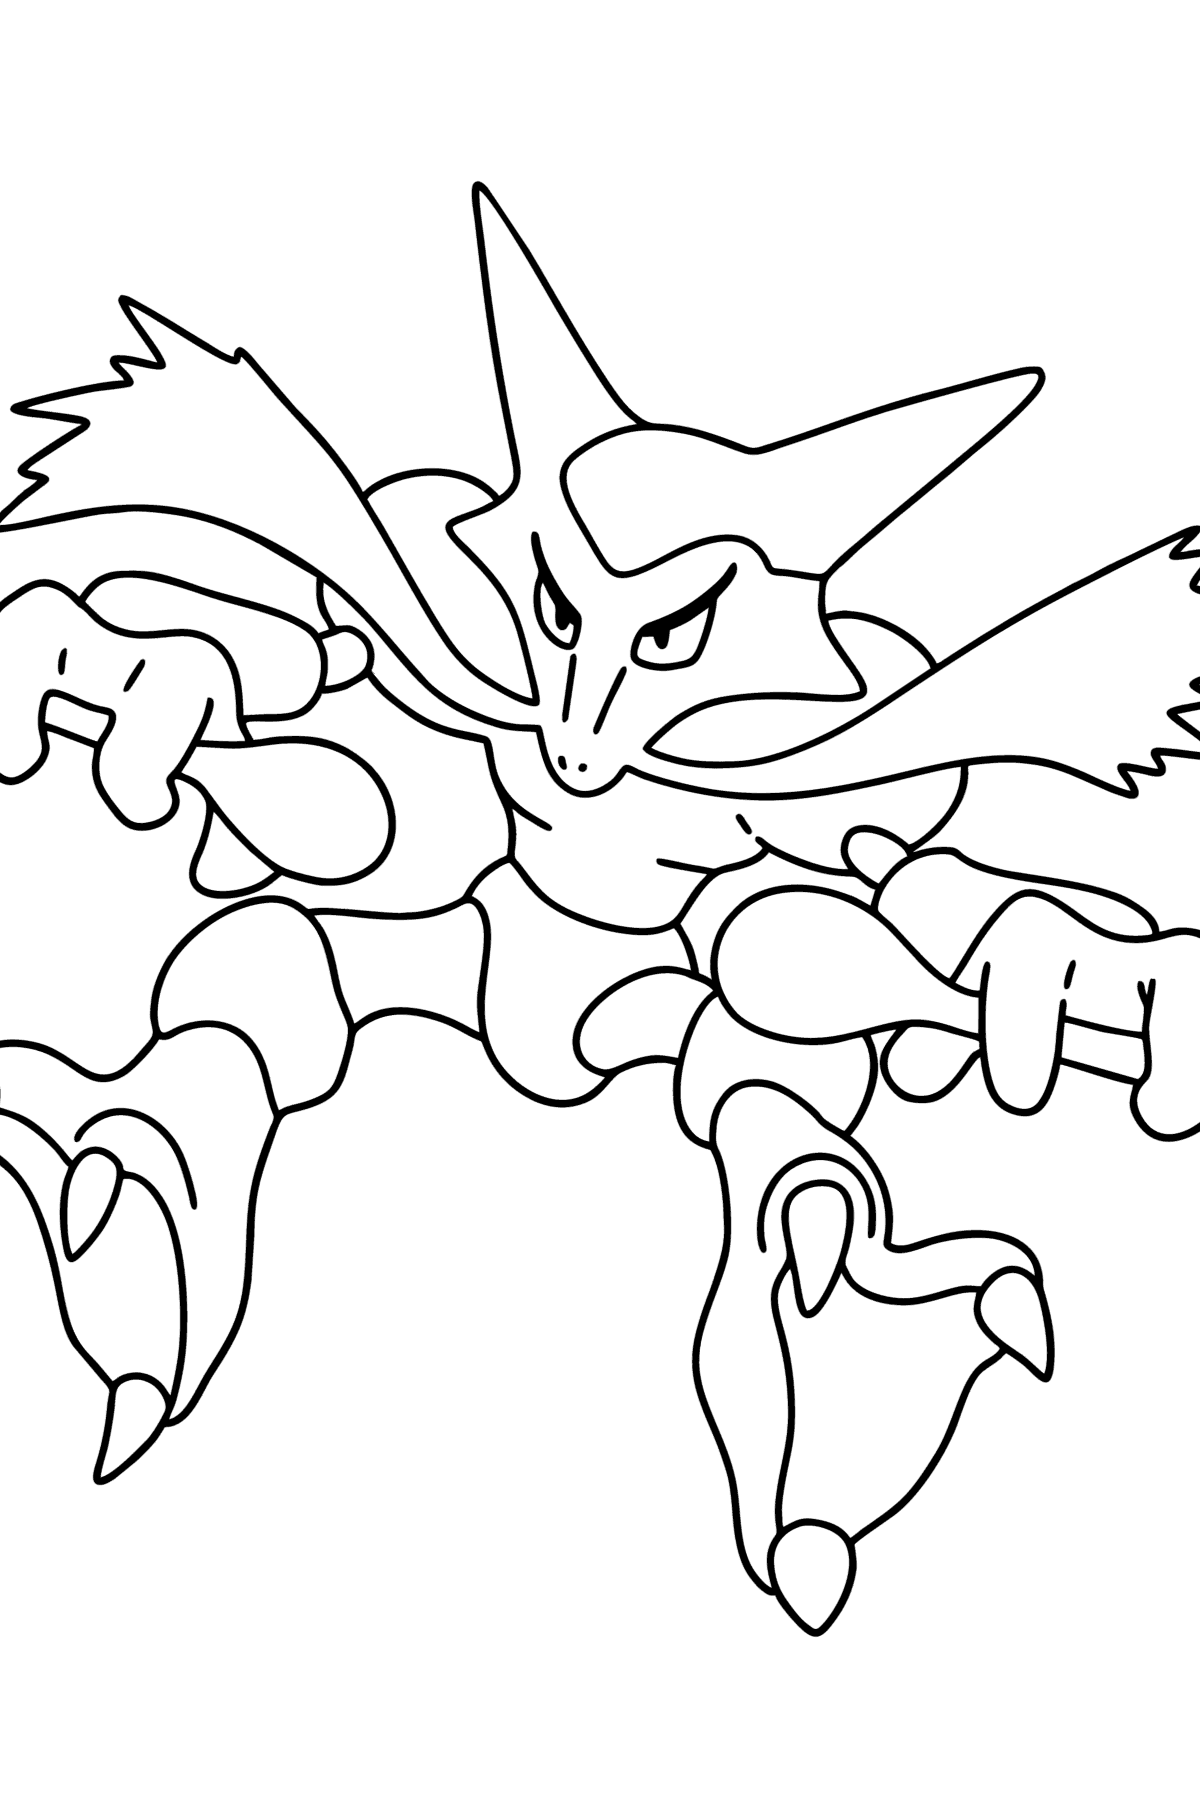 Coloring page Pokemon Go Alakazam - Coloring Pages for Kids